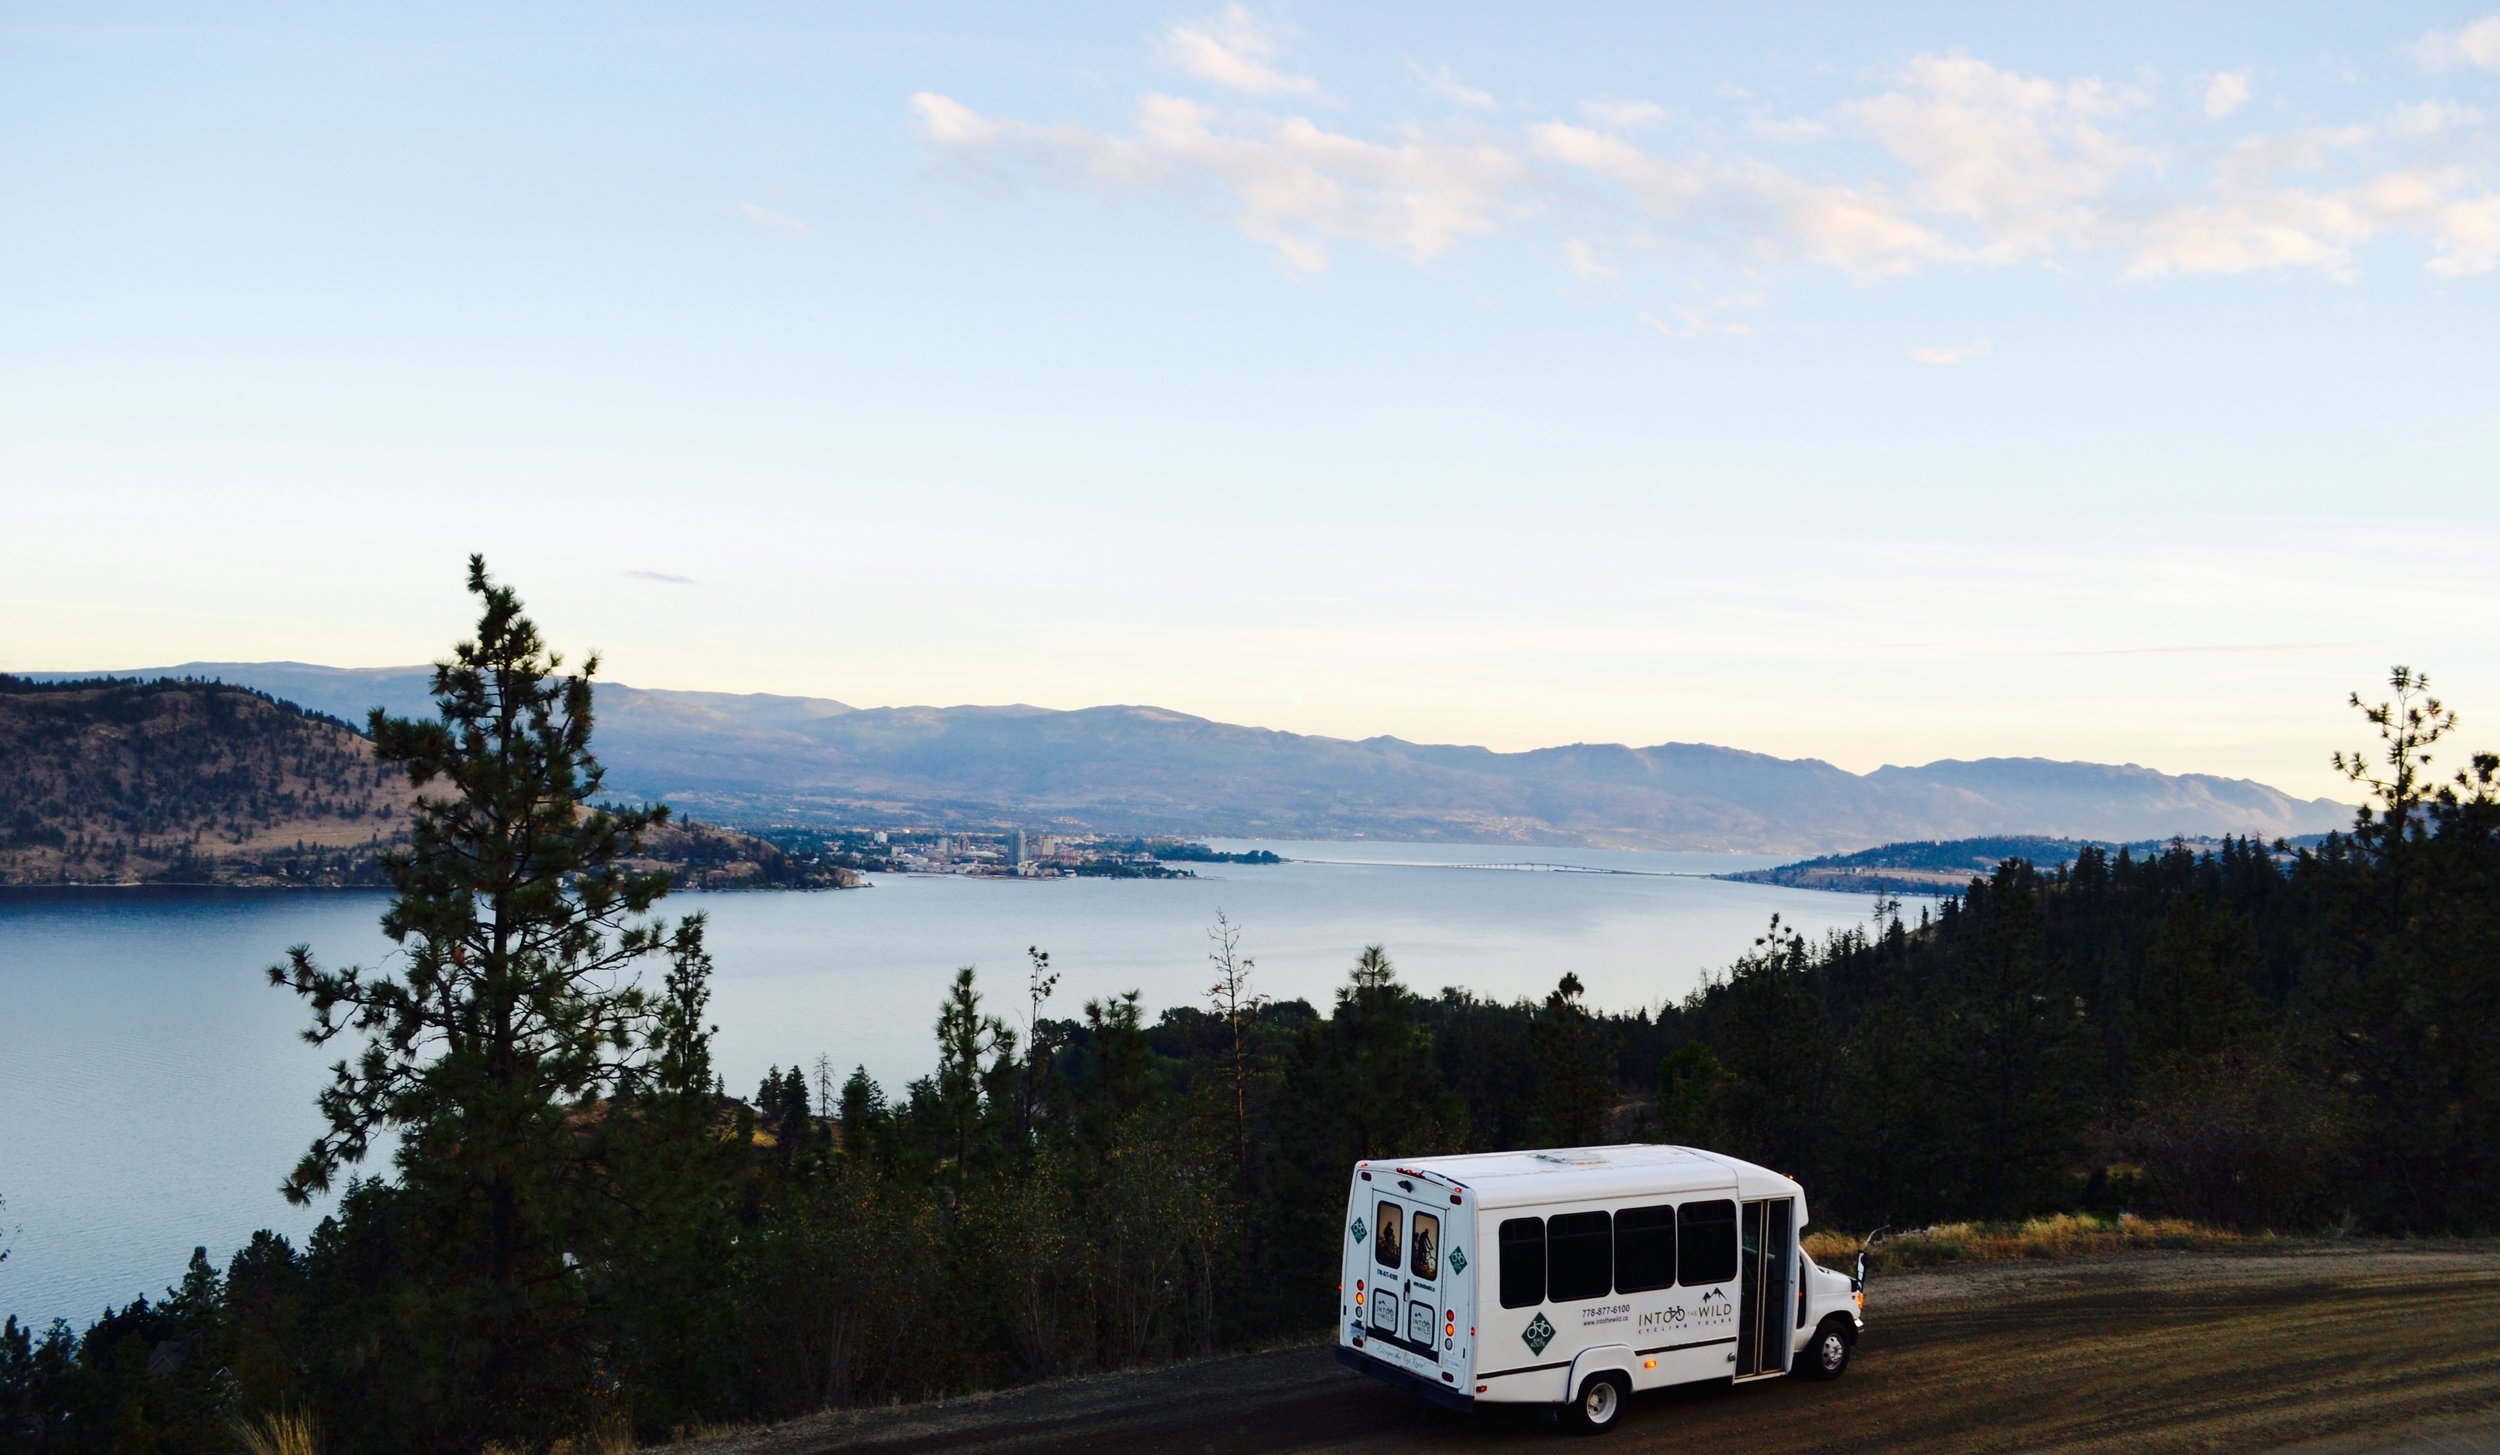 Our bus during one of our Multiday Bike tours in BC